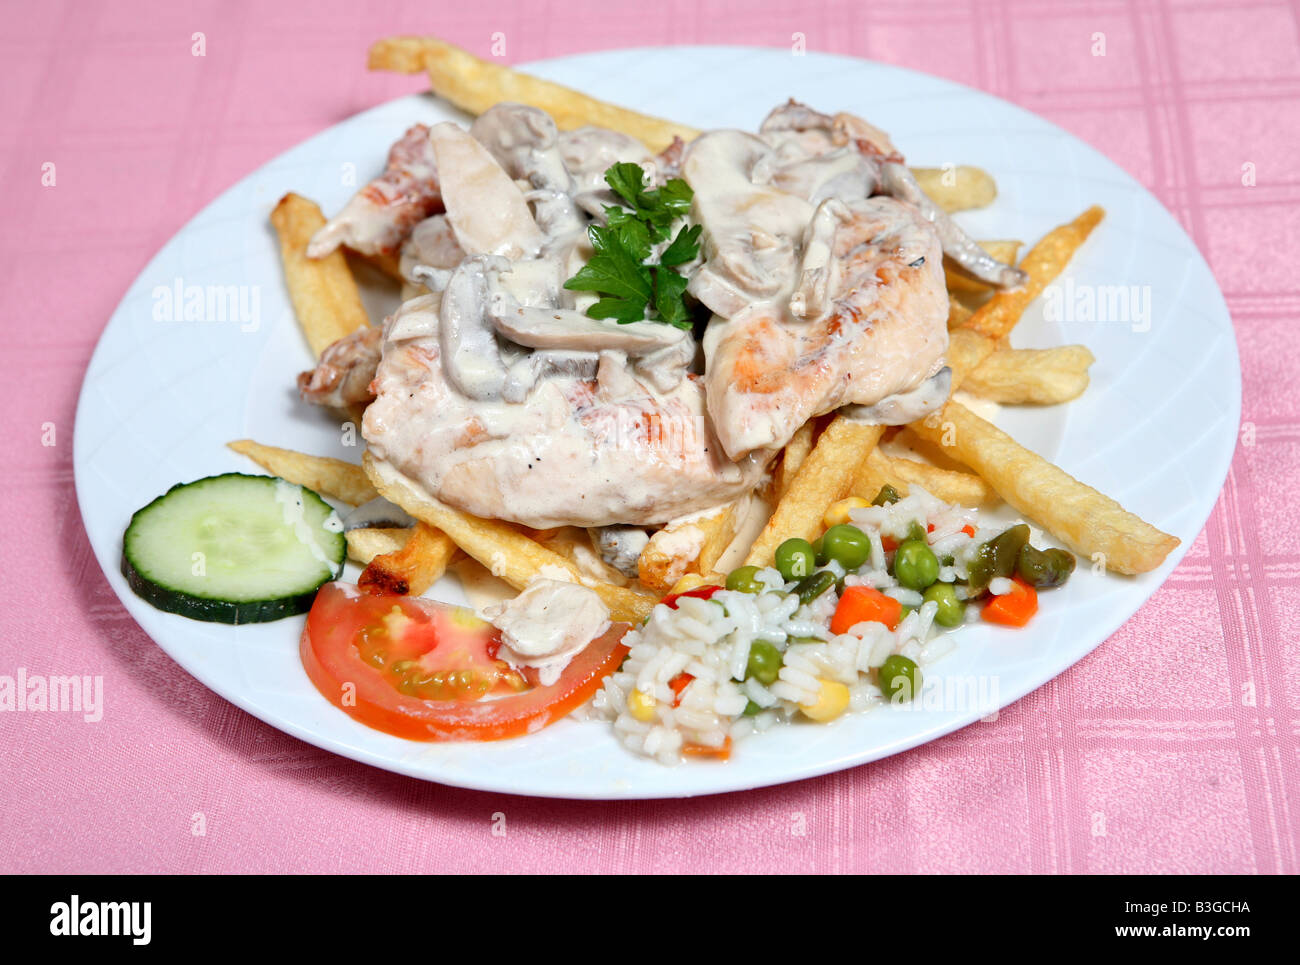 A Greek taverna meal of grilled chicken topped with mushrooms in cream and served with salad and rice Stock Photo